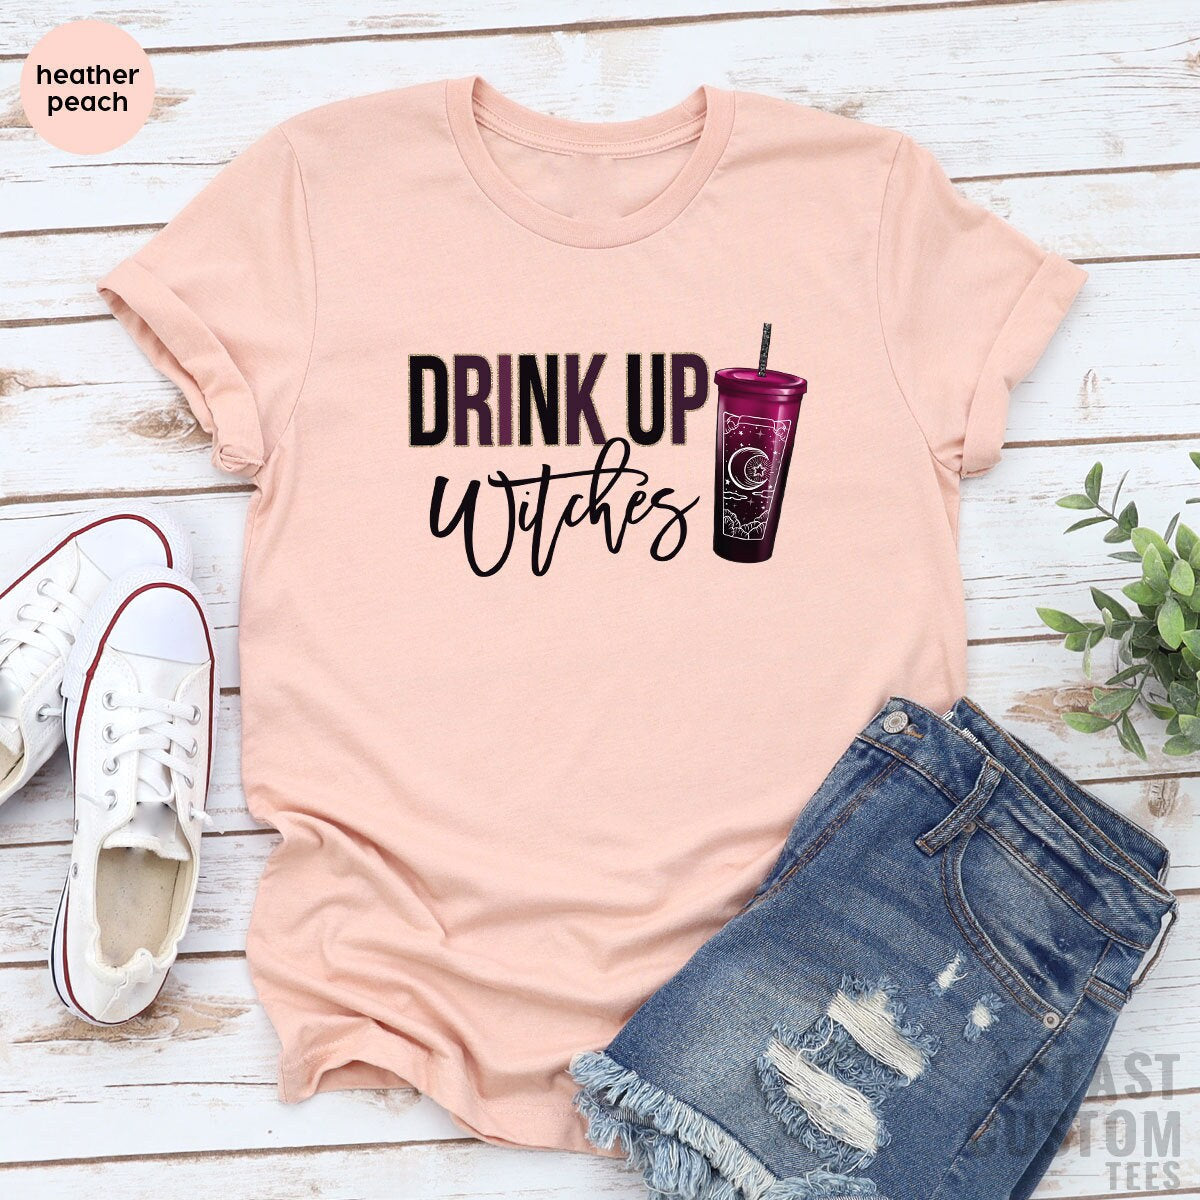 Drink Up Witches Shirt, Witch T-Shirt, Funny Halloween Shirt, Halloween Drinking Shirt, Gifts For Halloween, Coffee Lover Shirt, Fall Tshirt - Fastdeliverytees.com